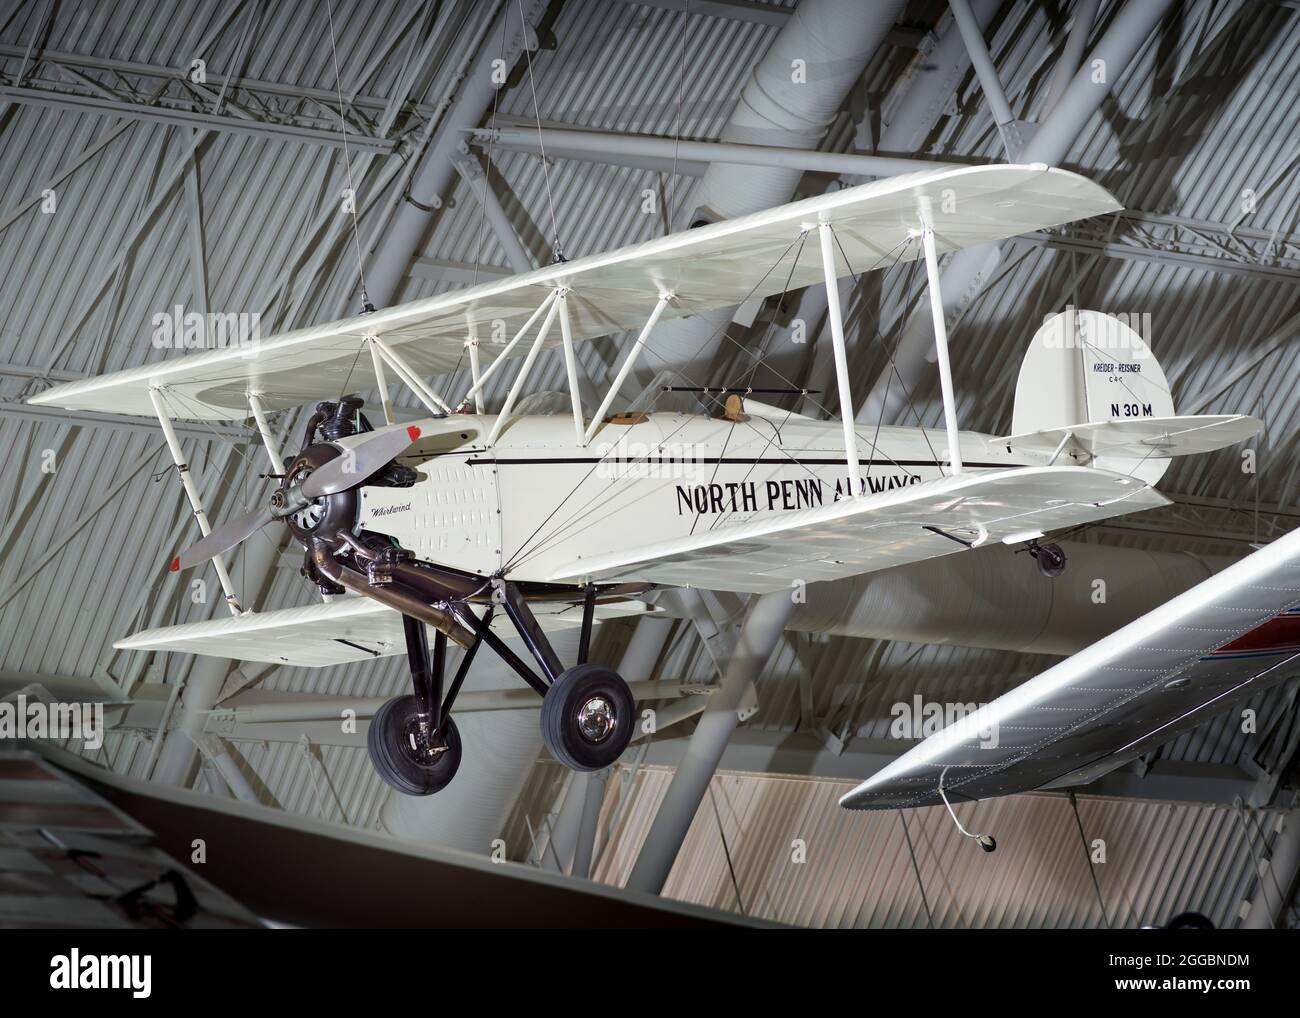 Off-white, black trim; Wright J-6, 150 hp single-engine, 3-place biplane. Amron Kreider and Lewis Reisner of Hagerstown, Maryland, built the Kreider-Reisner C-4C Challenger, a light and efficient biplane, as a replacement for aging Curtiss Jennys and Standards. Beginning in 1926, Kreider-Reisner built a series of three-place, open-cockpit aircraft that flew exceptionally well. The addition of a Wright J-6 engine made the design especially reliable. In April 1929, Kreider-Reisner became a subsidiary of the Fairchild Airplane Manufacturing Company, which redesignated the C-4C Challenger line as Stock Photo